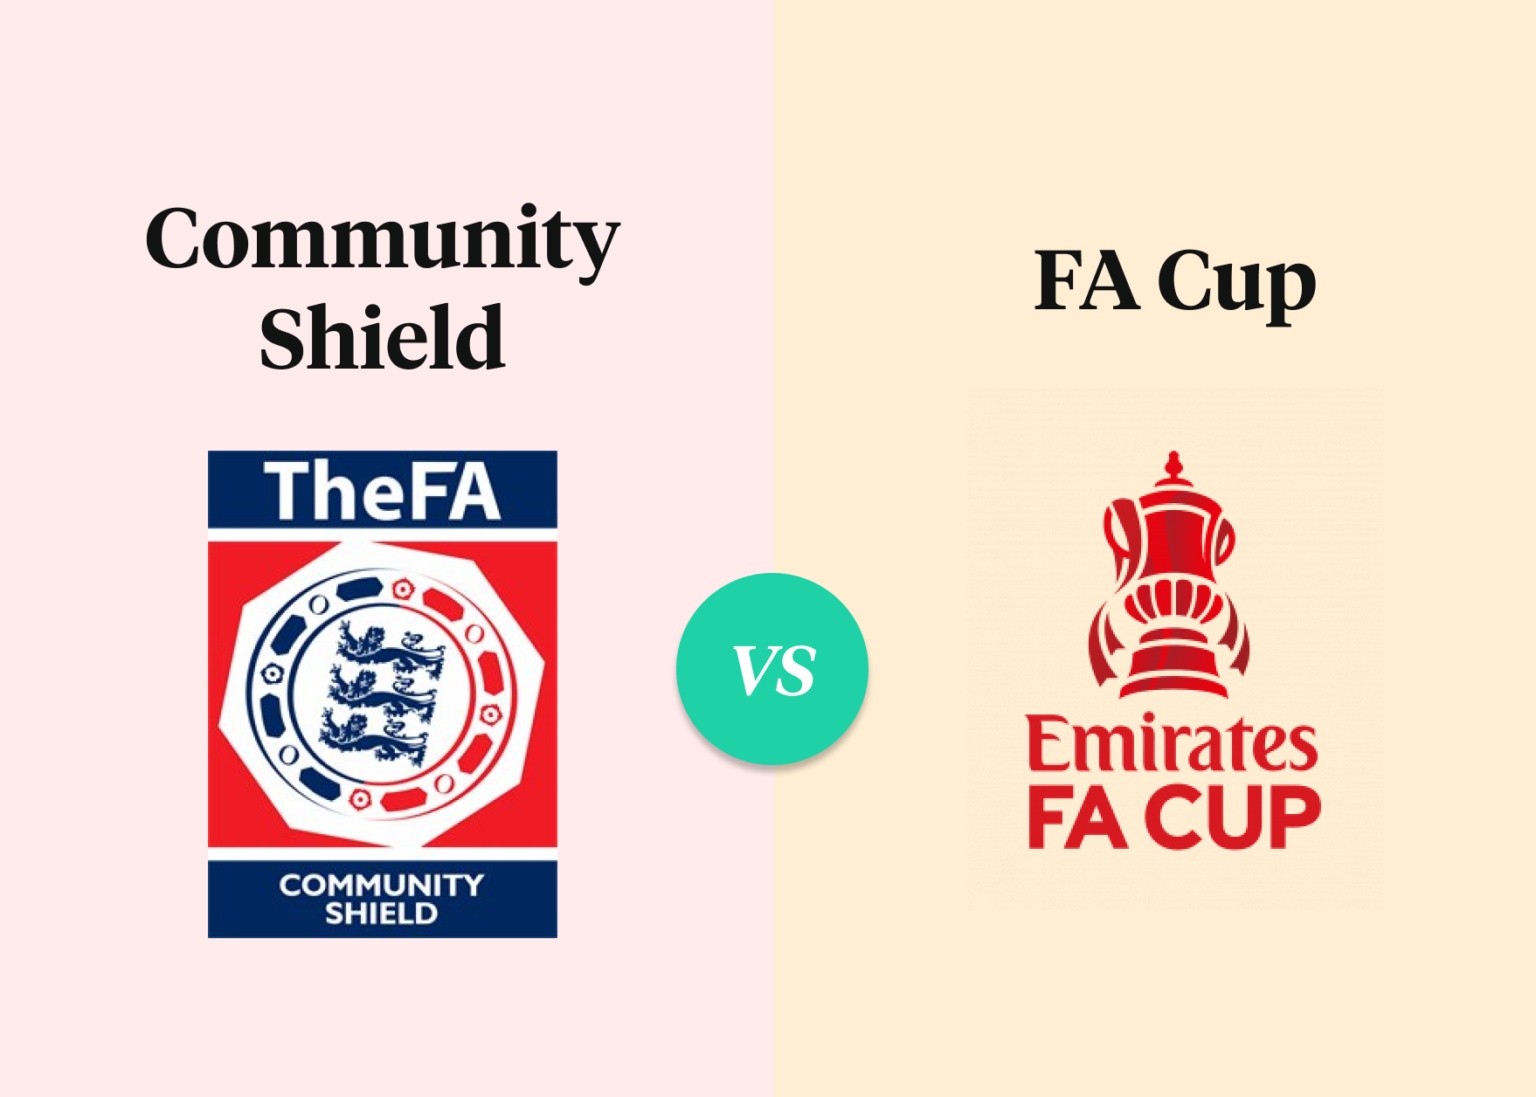 Community Shield vs FA Cup What's The Difference? Football Handbook